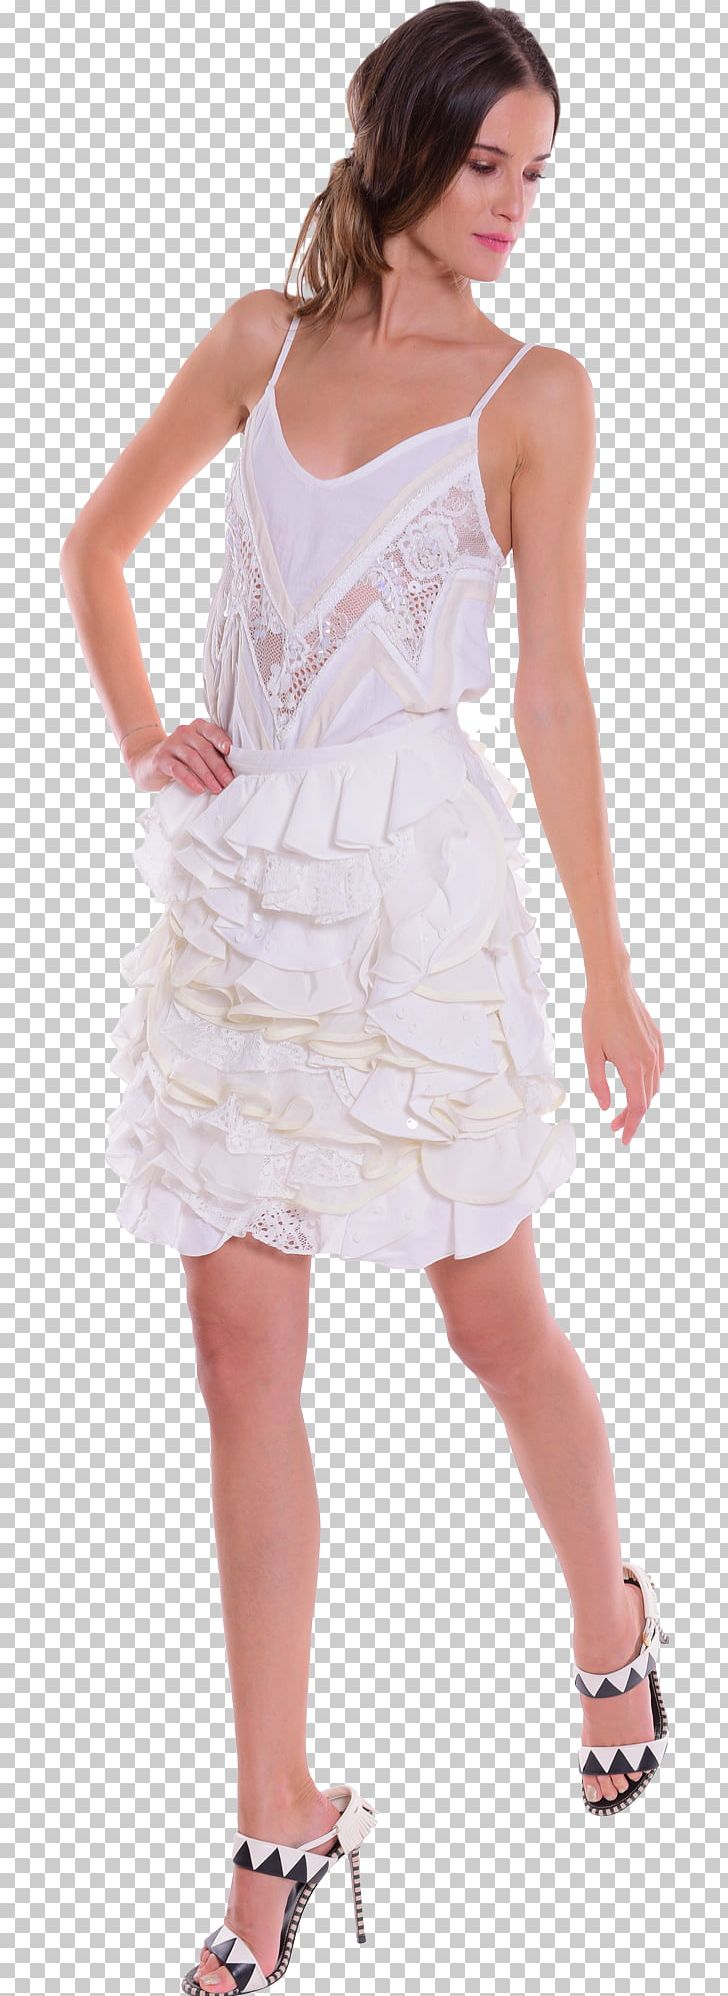 Cocktail Dress Ruffle Shoulder PNG, Clipart, Clothing, Cocktail, Cocktail Dress, Day Dress, Dress Free PNG Download